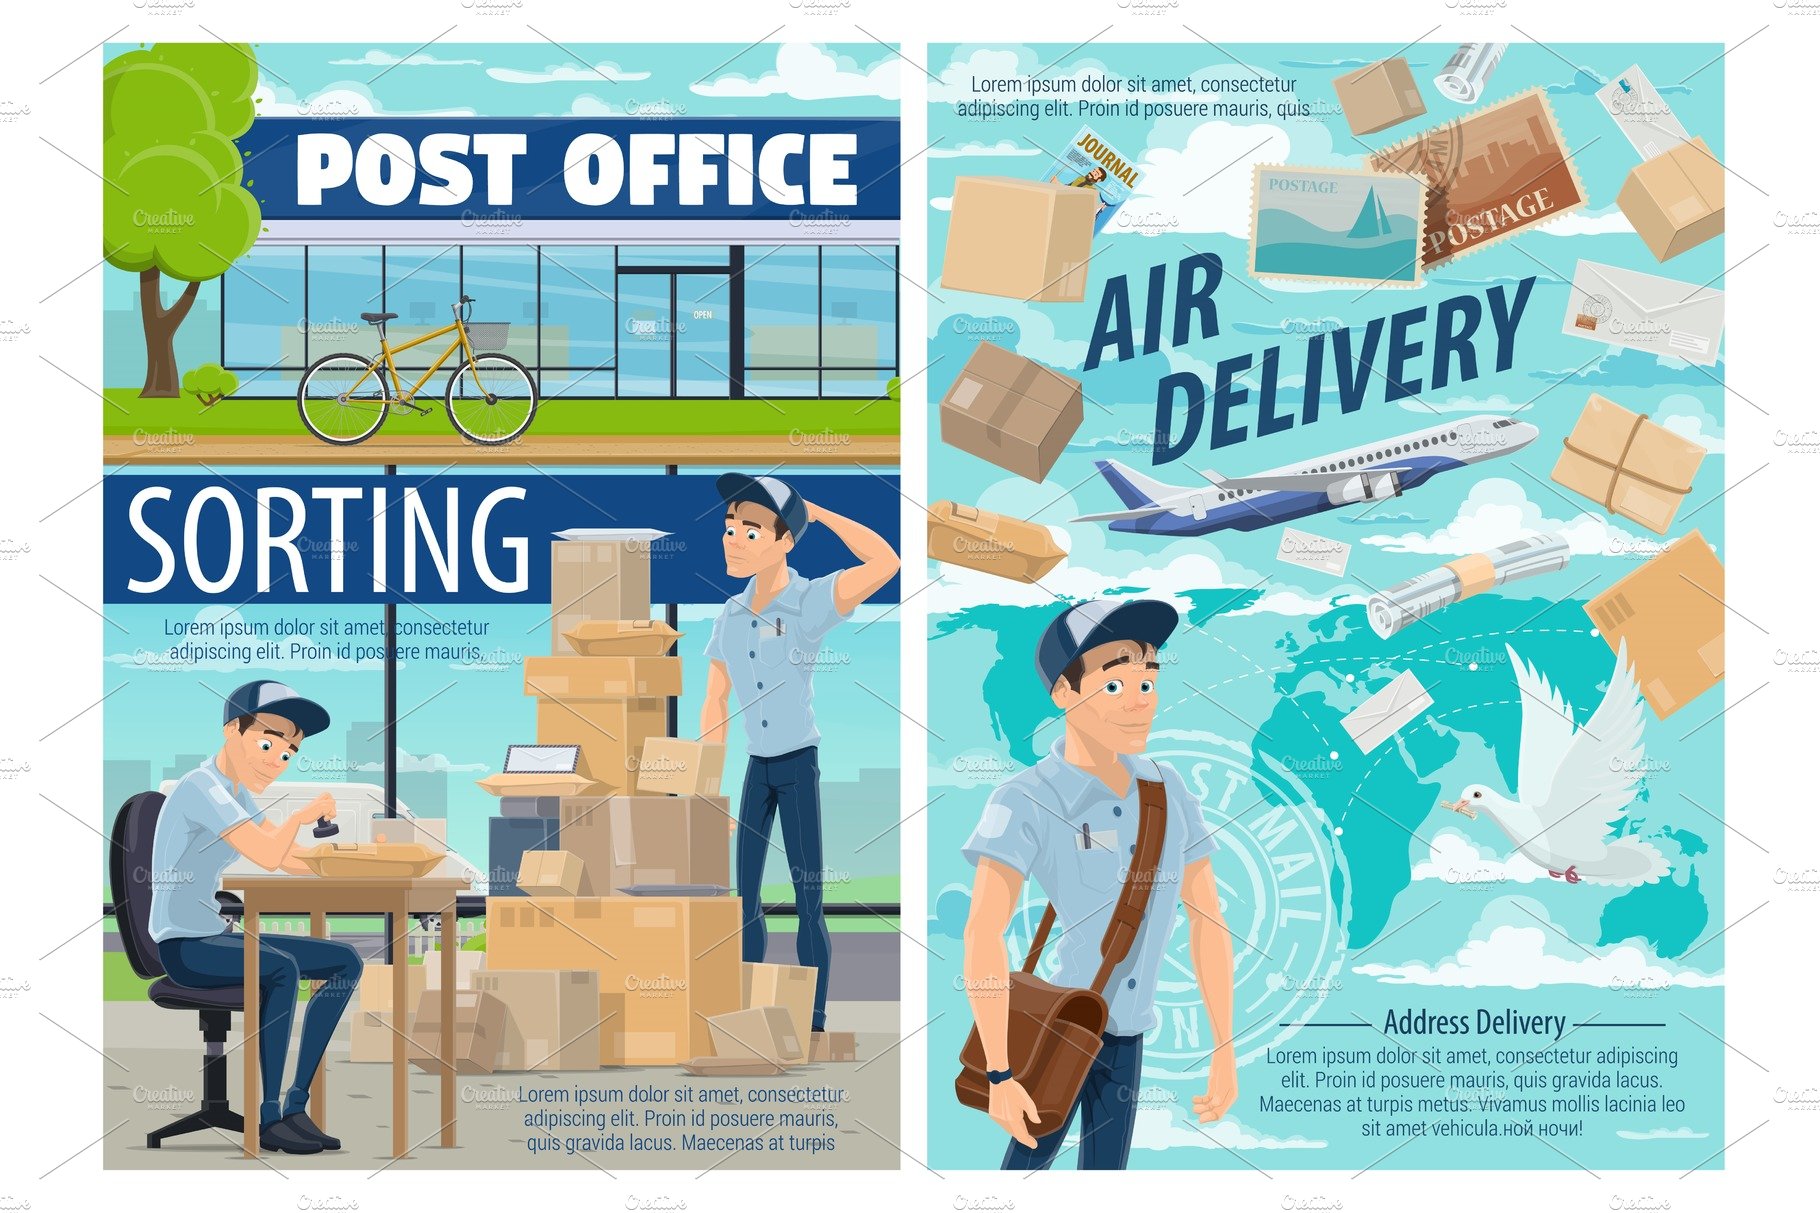 Air mail, postman at post office cover image.